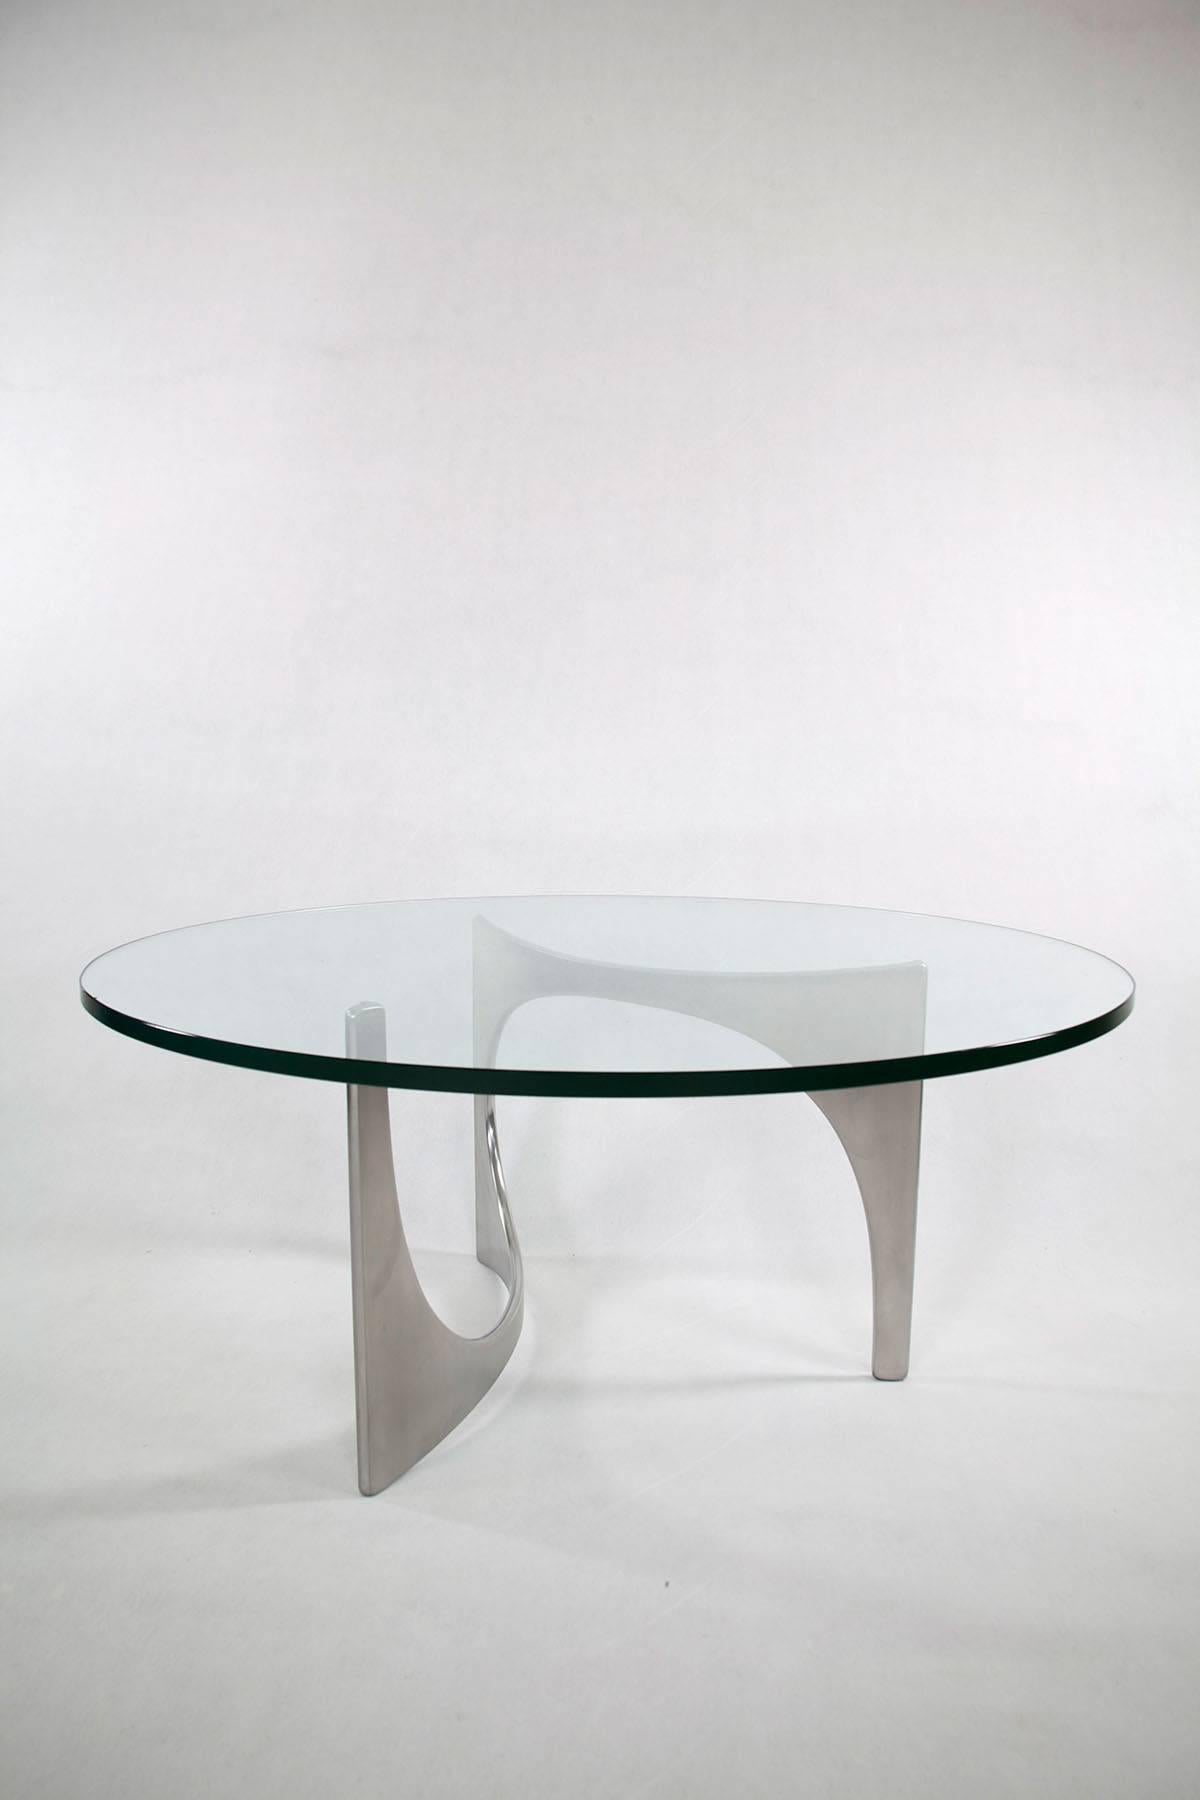 Knut Hesterberg German Aluminium Glass Sculptural Side Table, 1970s In Good Condition For Sale In Wolfurt, AT